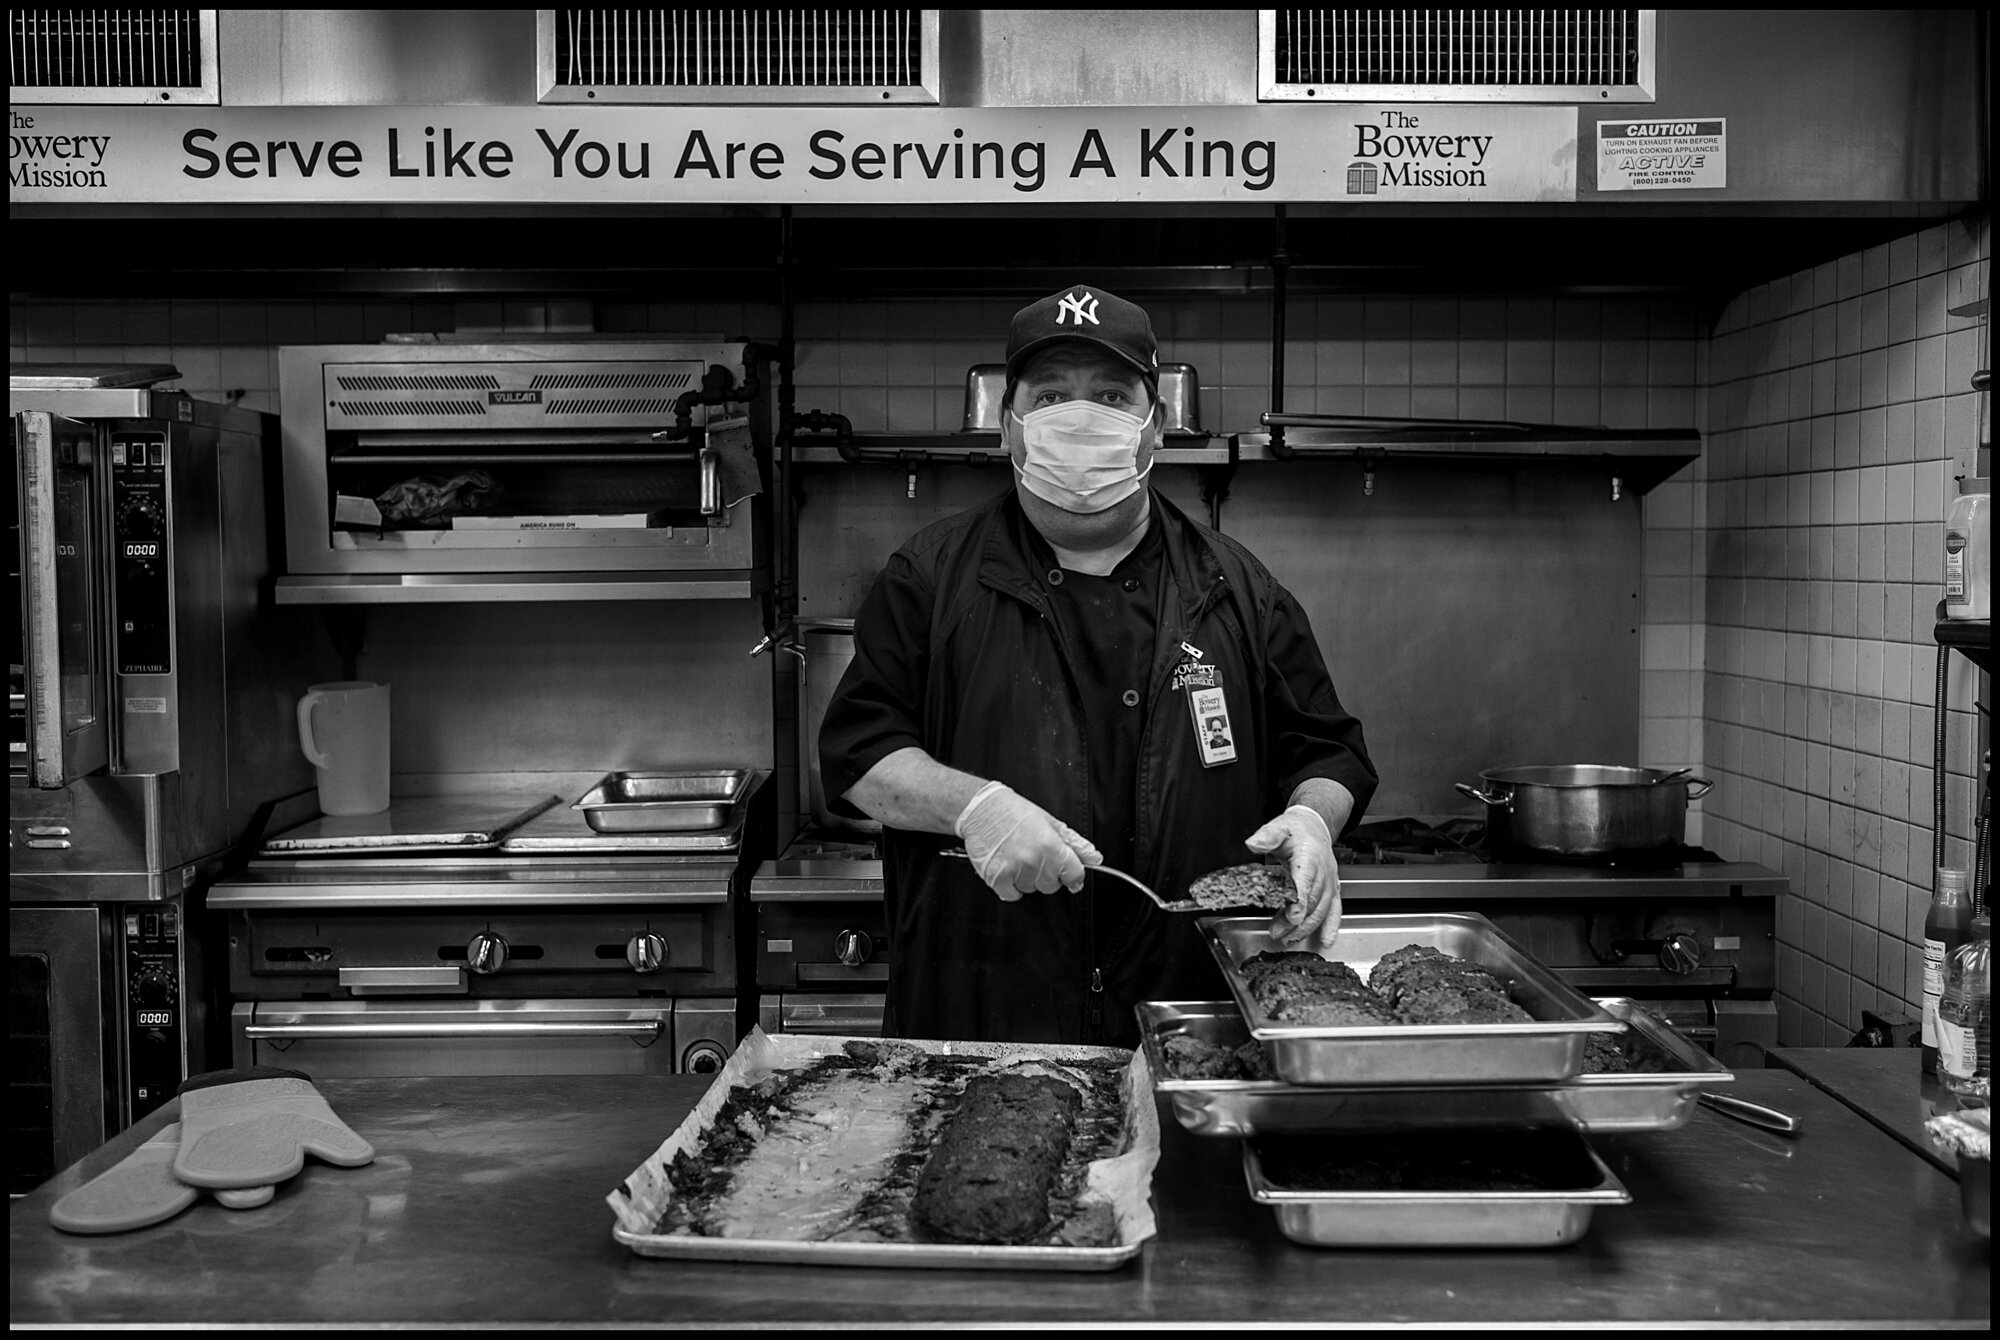  John, 58, a cook at The Bowery Mission, stands over a grill preparing food, with a sign above saying, “Serve Like You Are Serving a King”.   April 10, 2020. © Peter Turnley.   ID# 18-005 